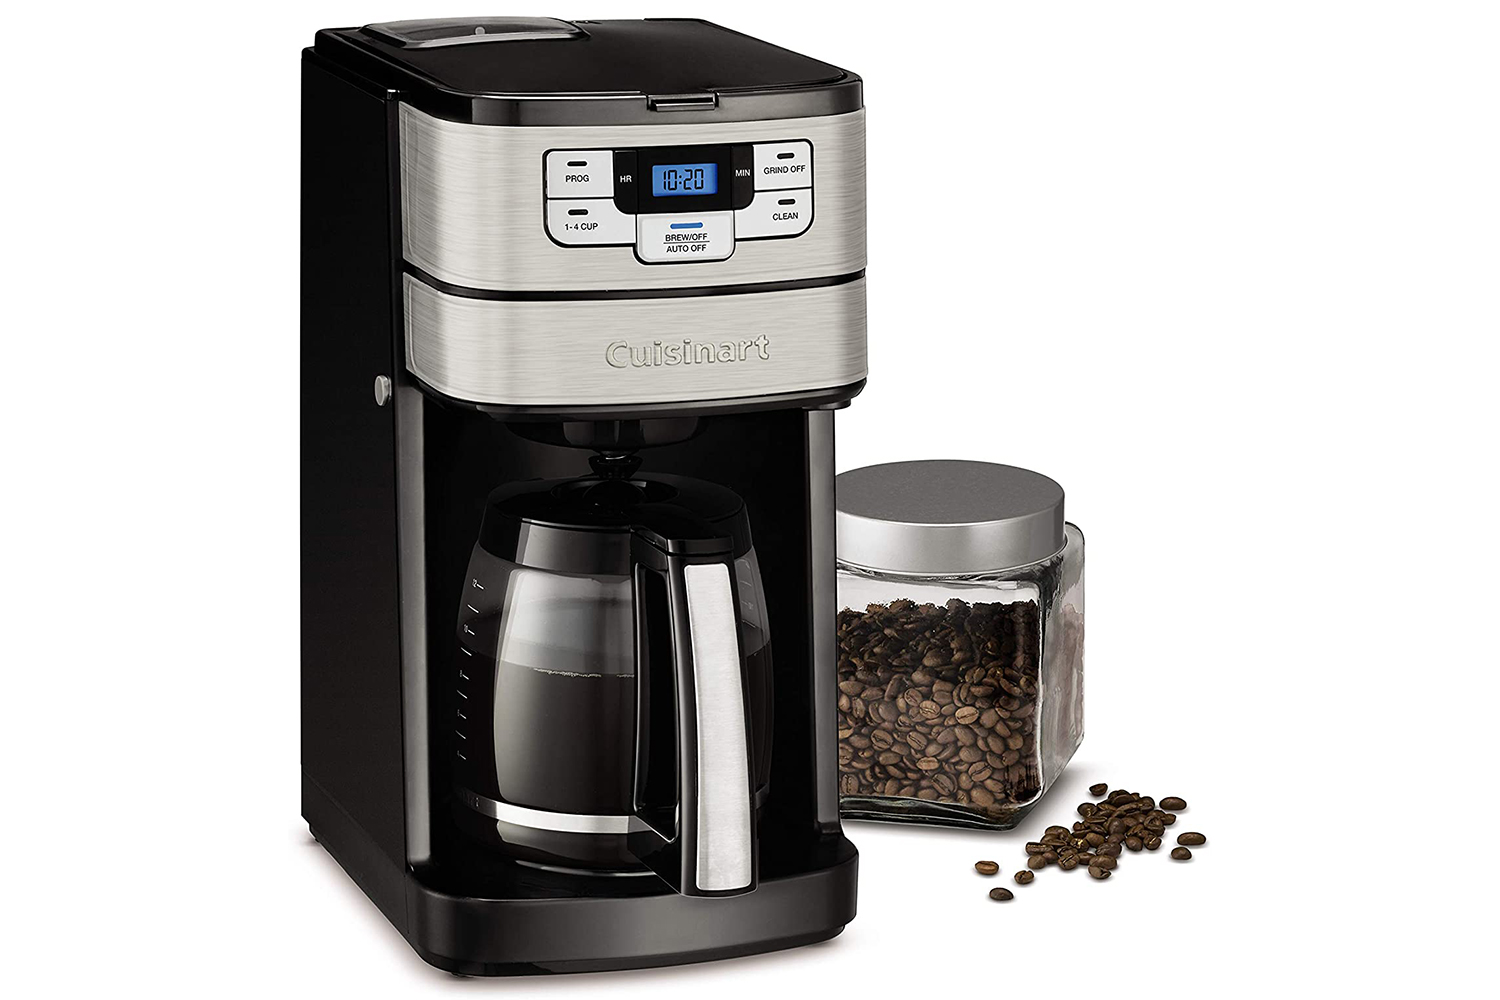 https://www.themanual.com/wp-content/uploads/sites/9/2021/06/cuisinart-automatic-grind-brew-12-cup.jpg?fit=800%2C800&p=1